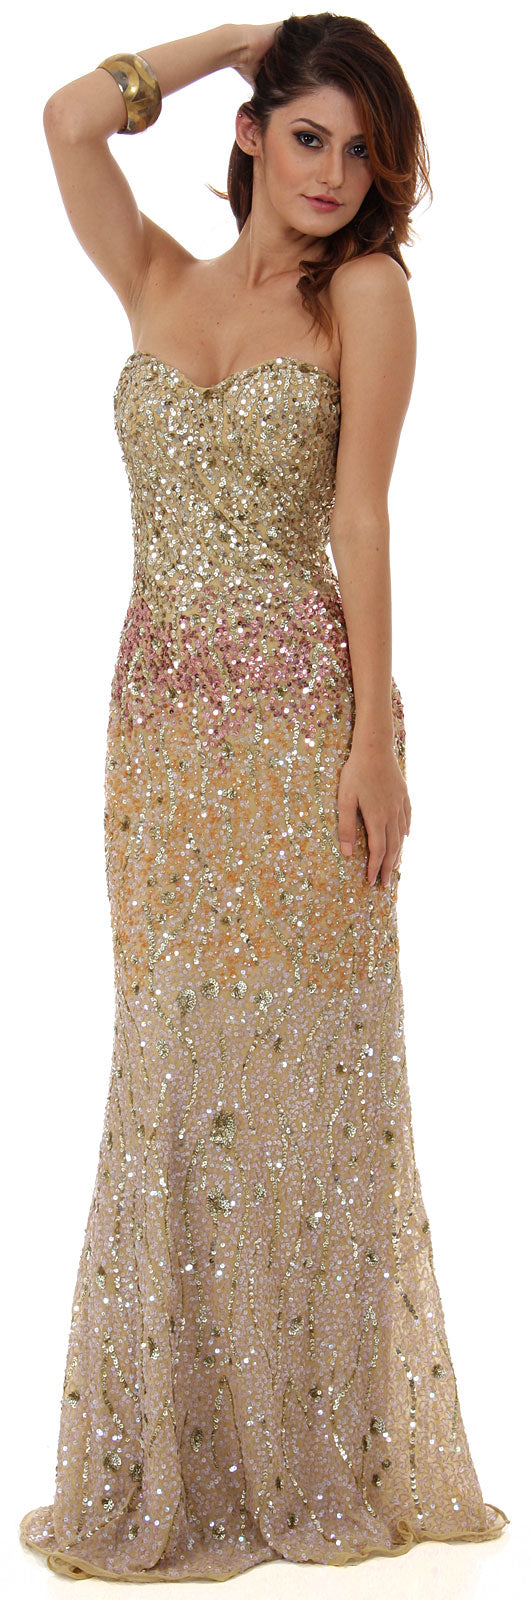 Image of Strapless Exquisitely Sequined Long Formal Prom Dress  in Gold